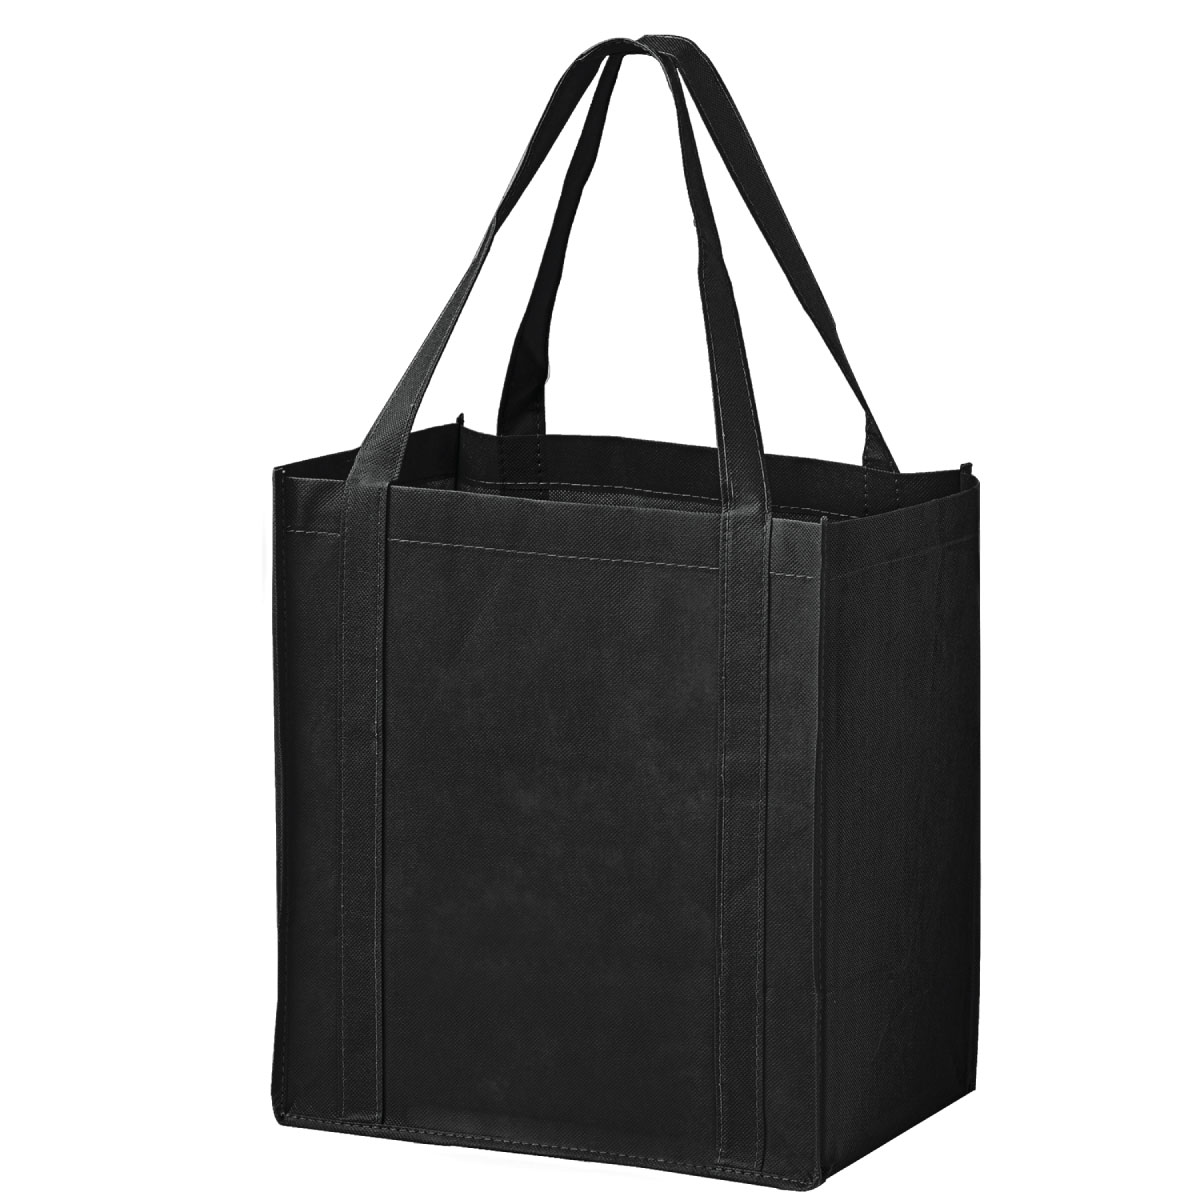 Black Recession Buster Grocery Bag (12"W x 8"G x 13"H)